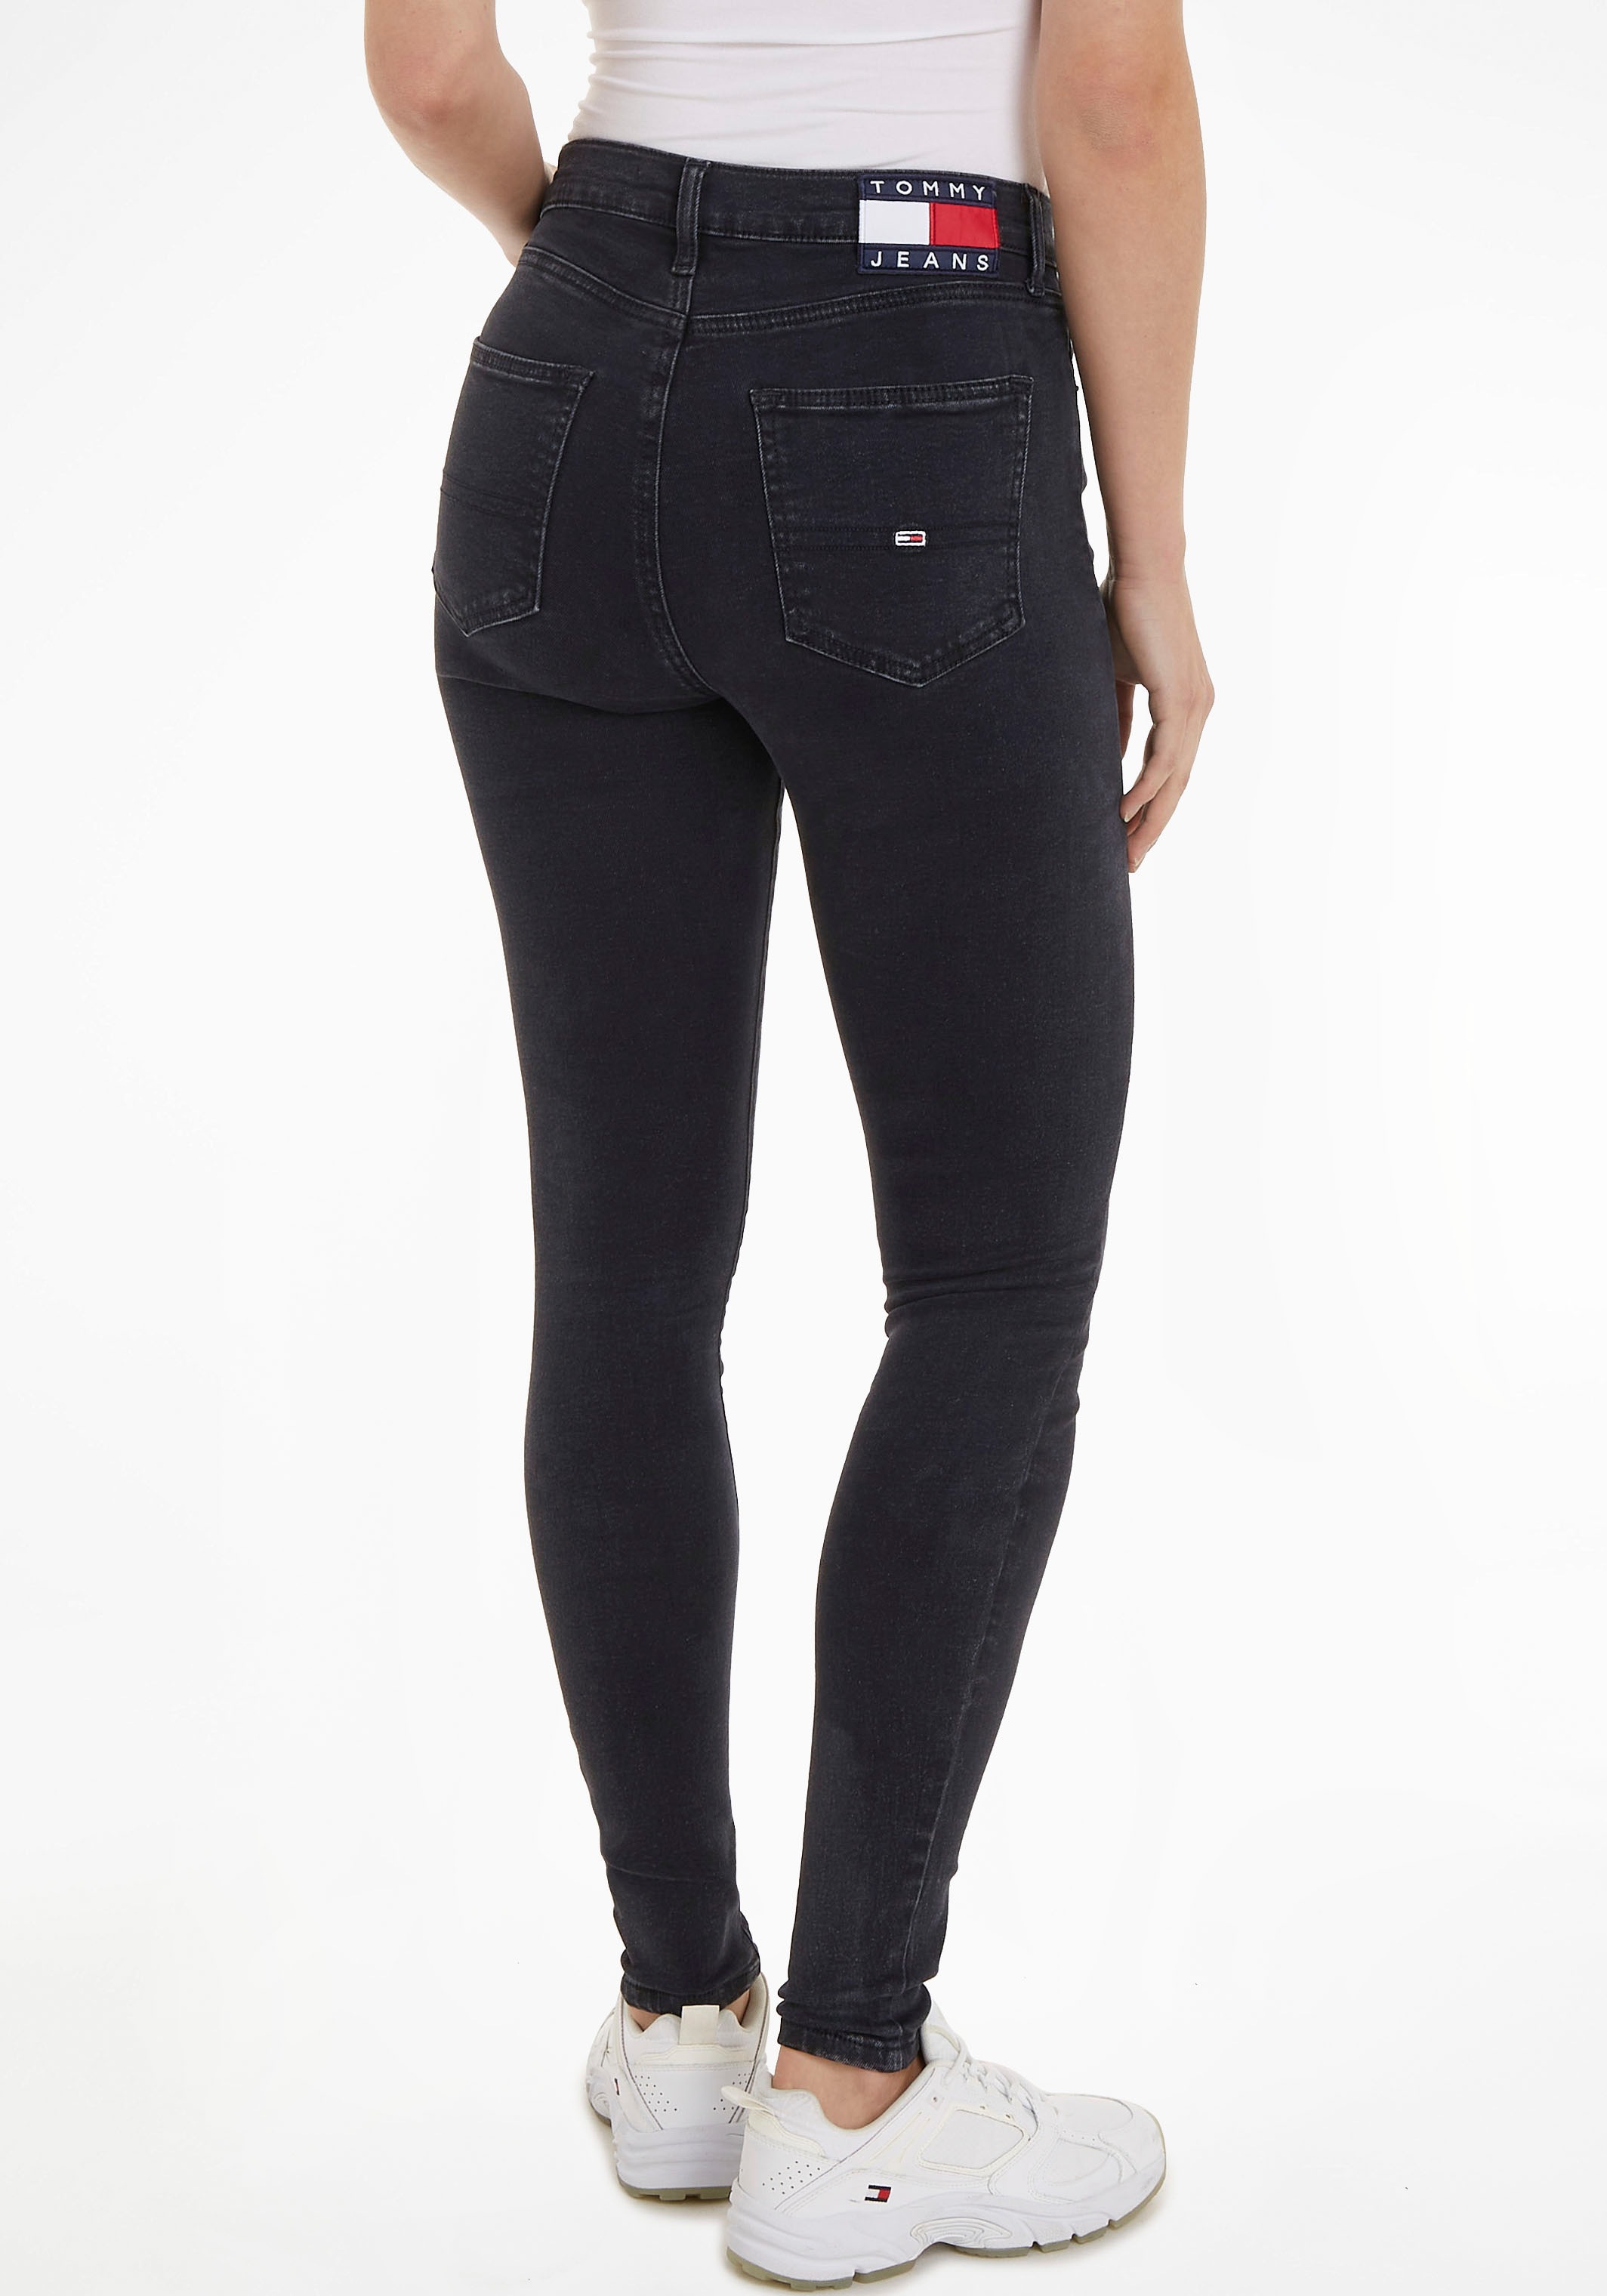 Jeans im Online Skinny-fit-Jeans mit SYLVIA »Jeans und SSKN Labelflags Logobadge HR Shop CG4«, OTTO Tommy